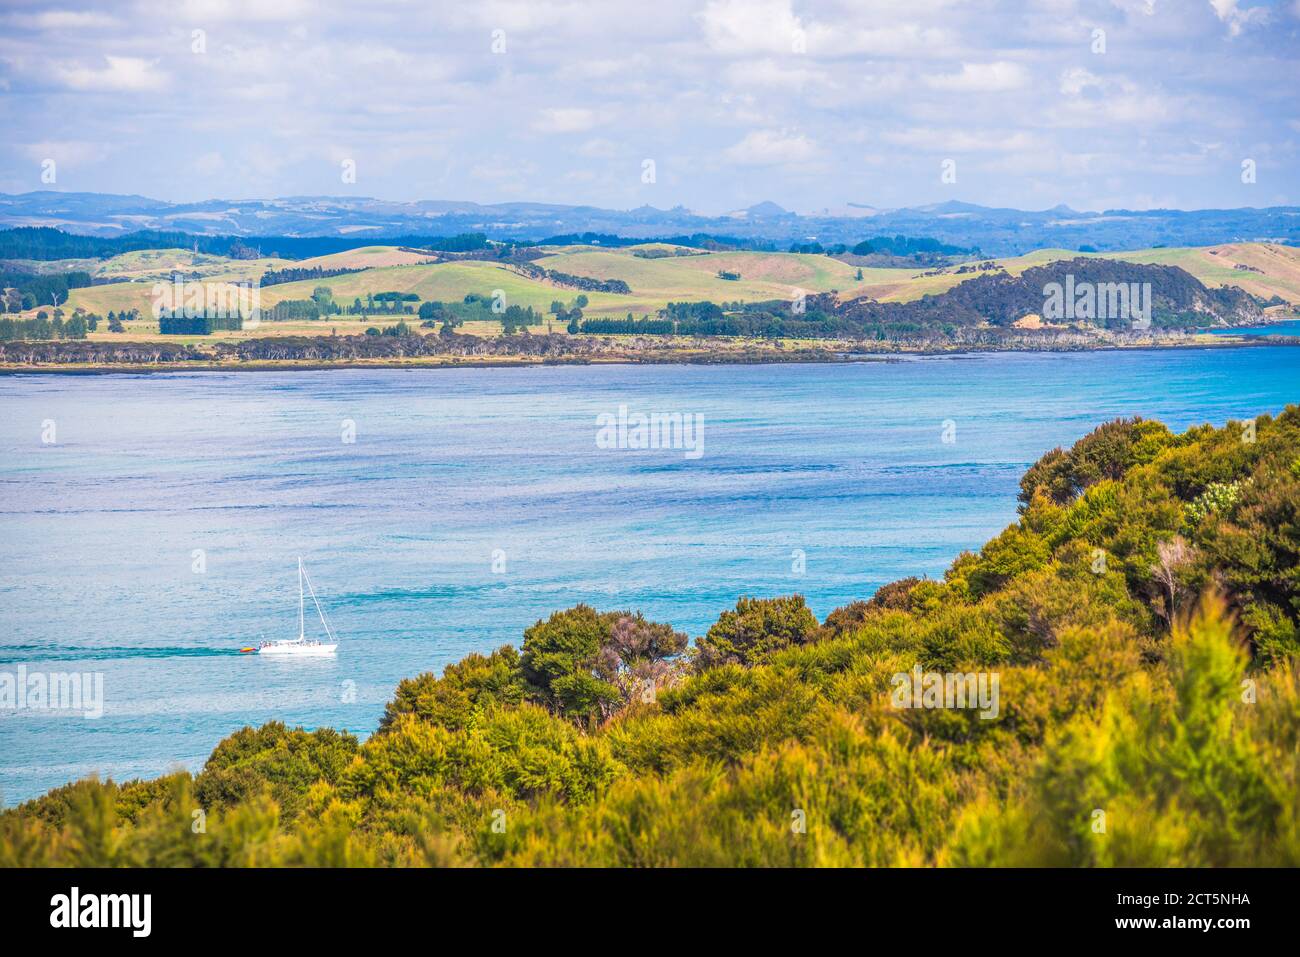 Sailing boat in the Bay of Islands seen from Russell, Northland Region, North Island, New Zealand Stock Photo